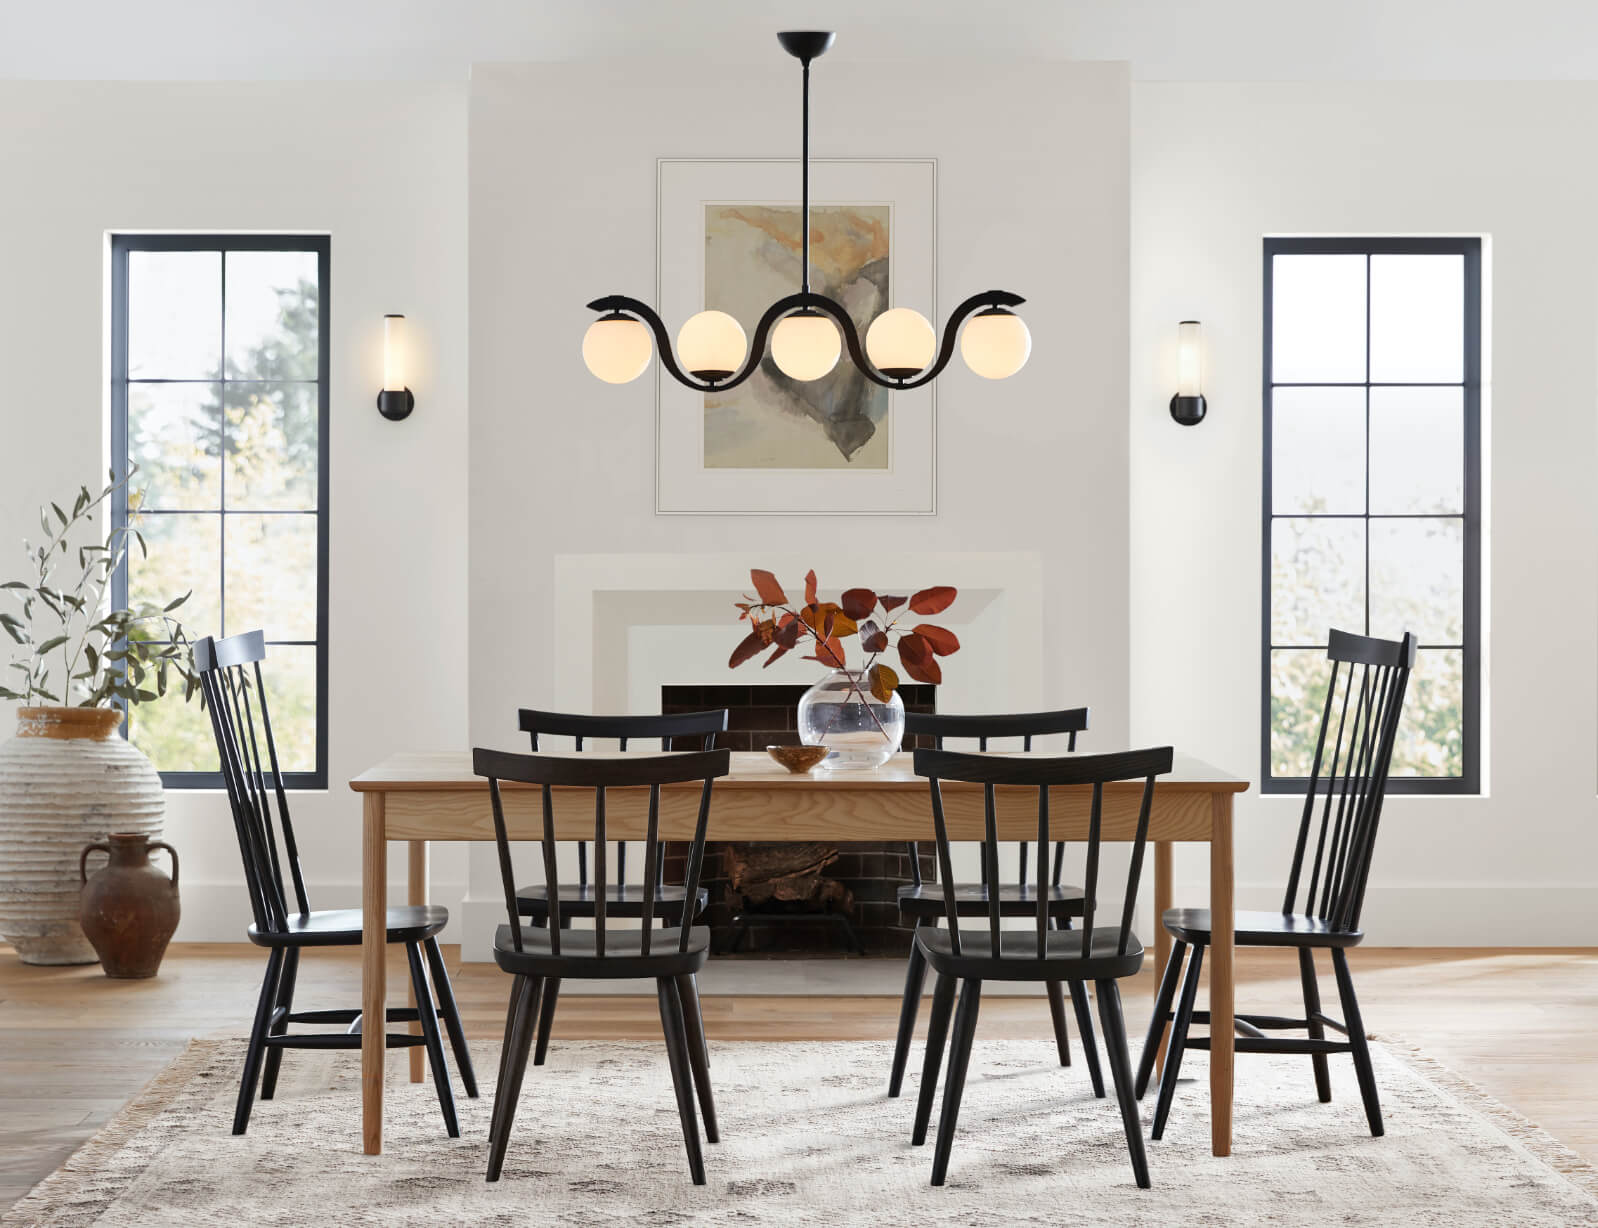  kitchen and dining room lighting fixtures